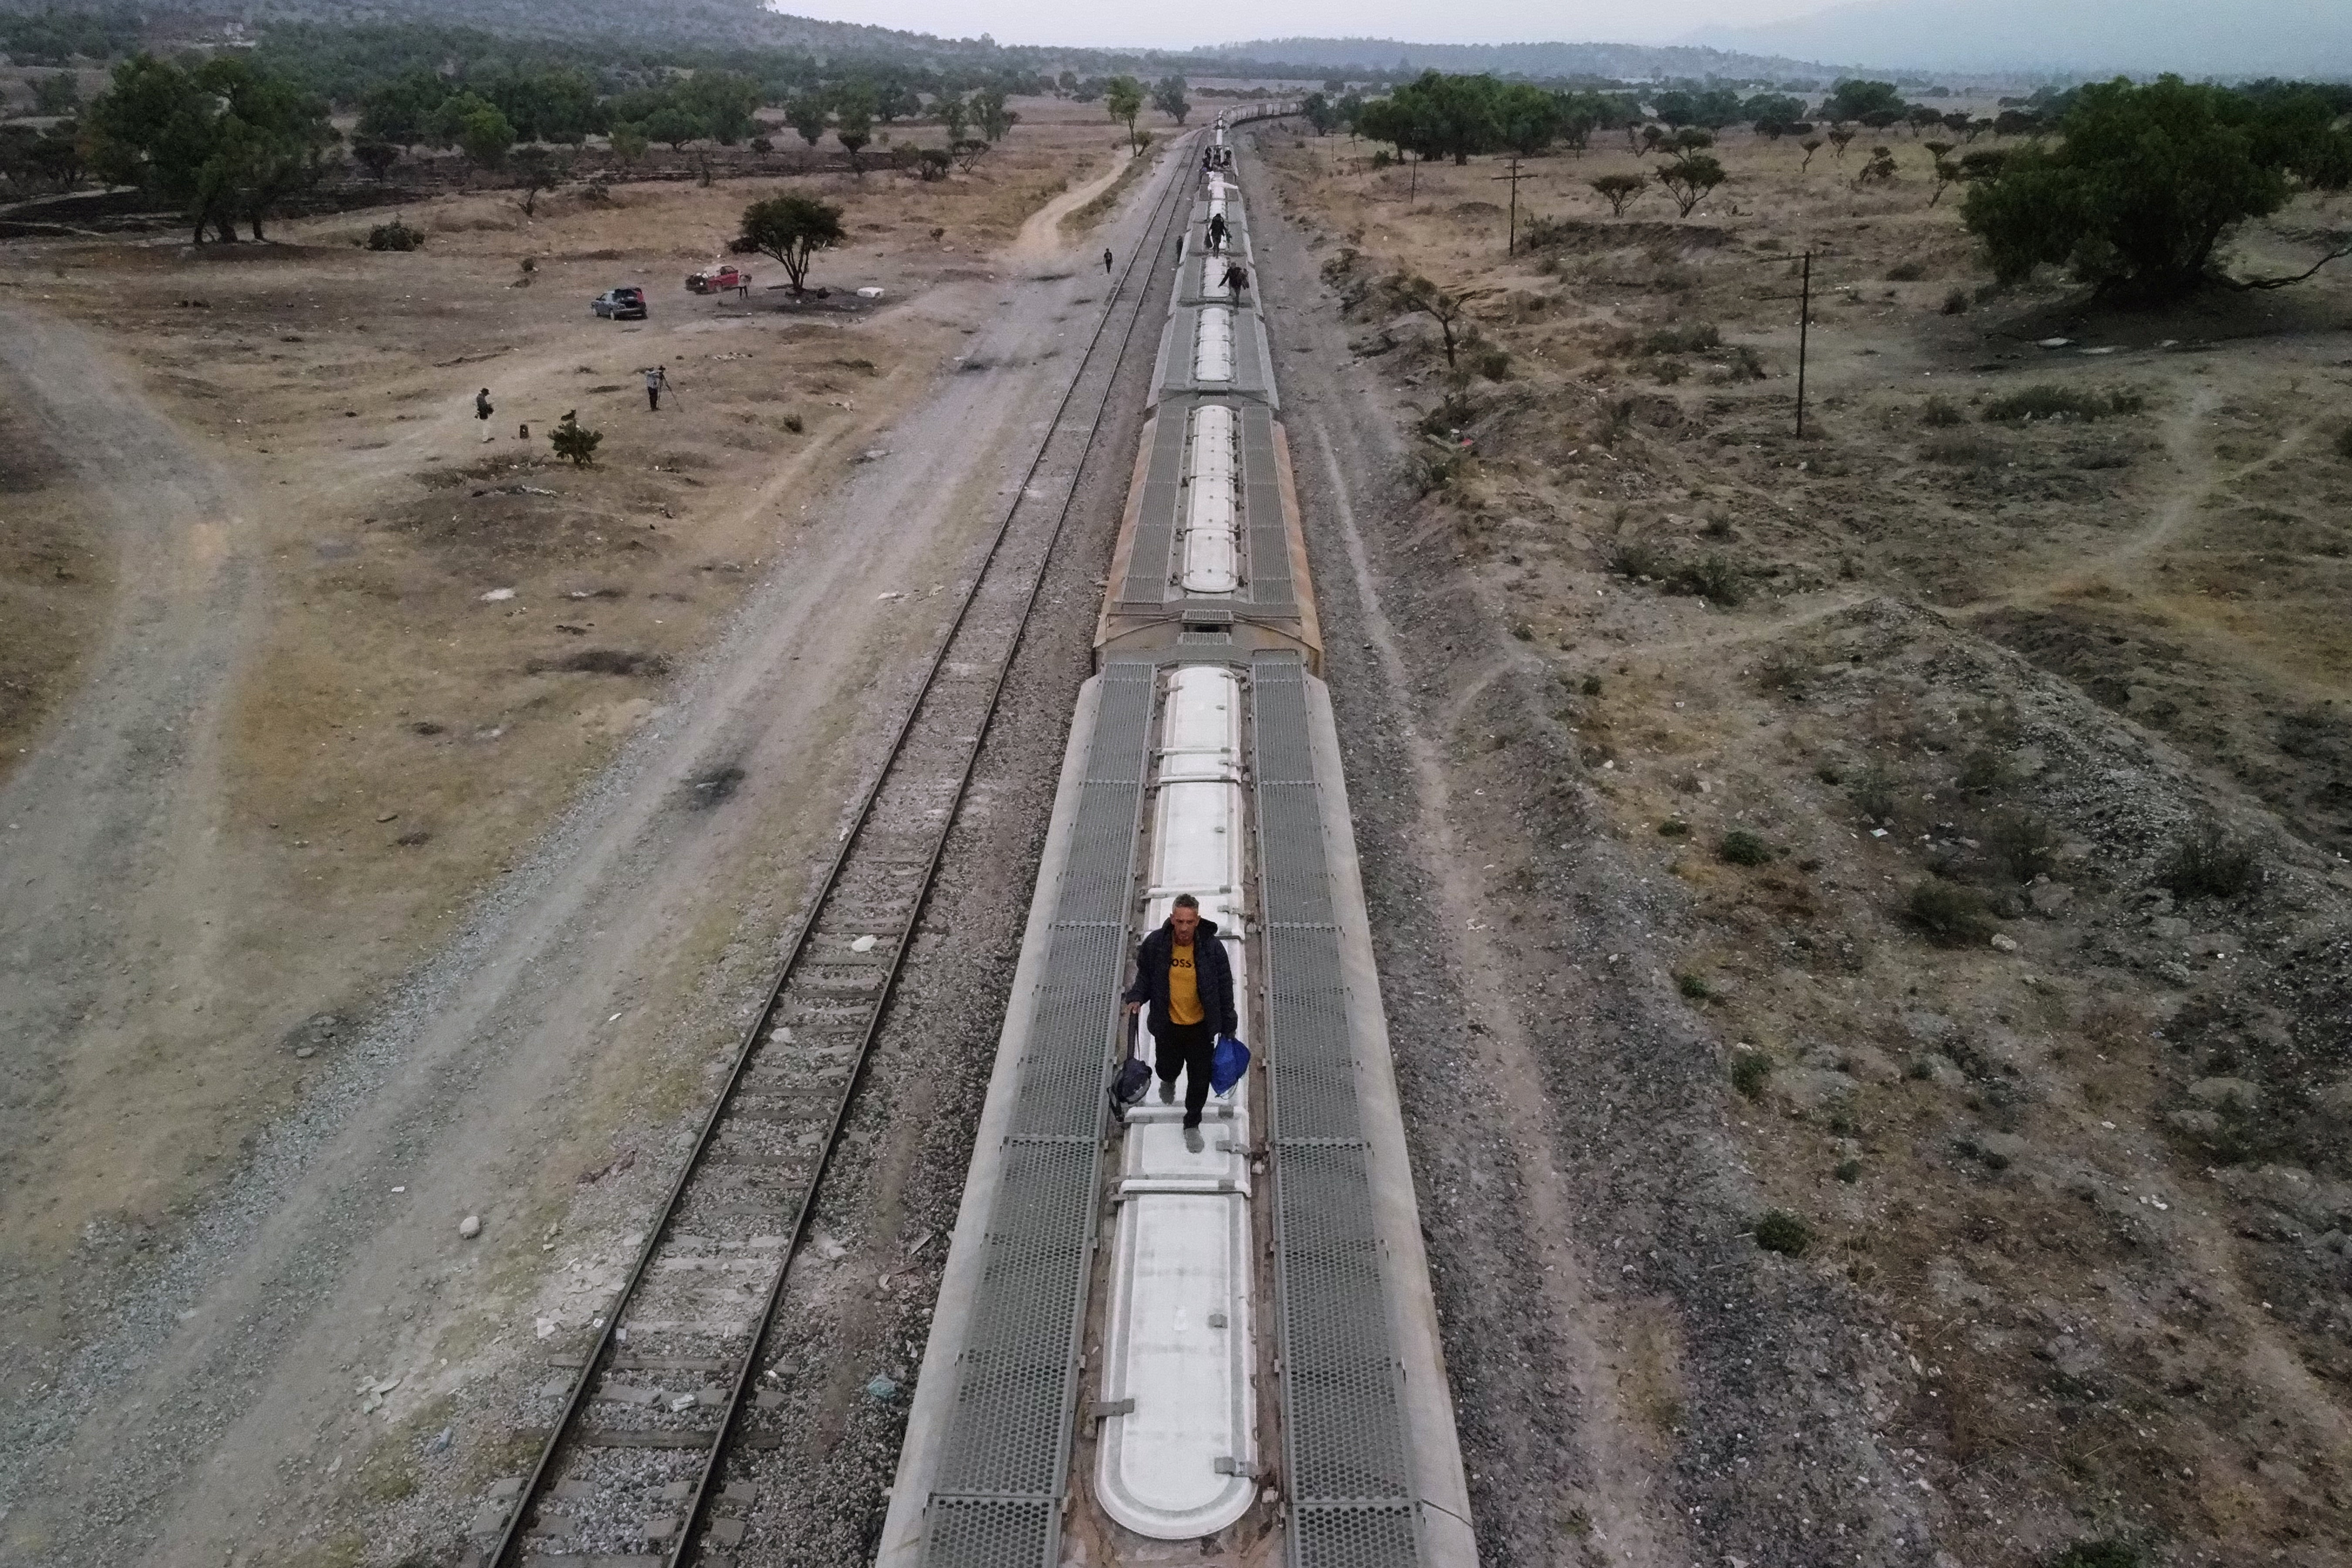 Migrants, mostly from Venezuela, walk on top of railroad cars as they get ready to continue their journey to the US border